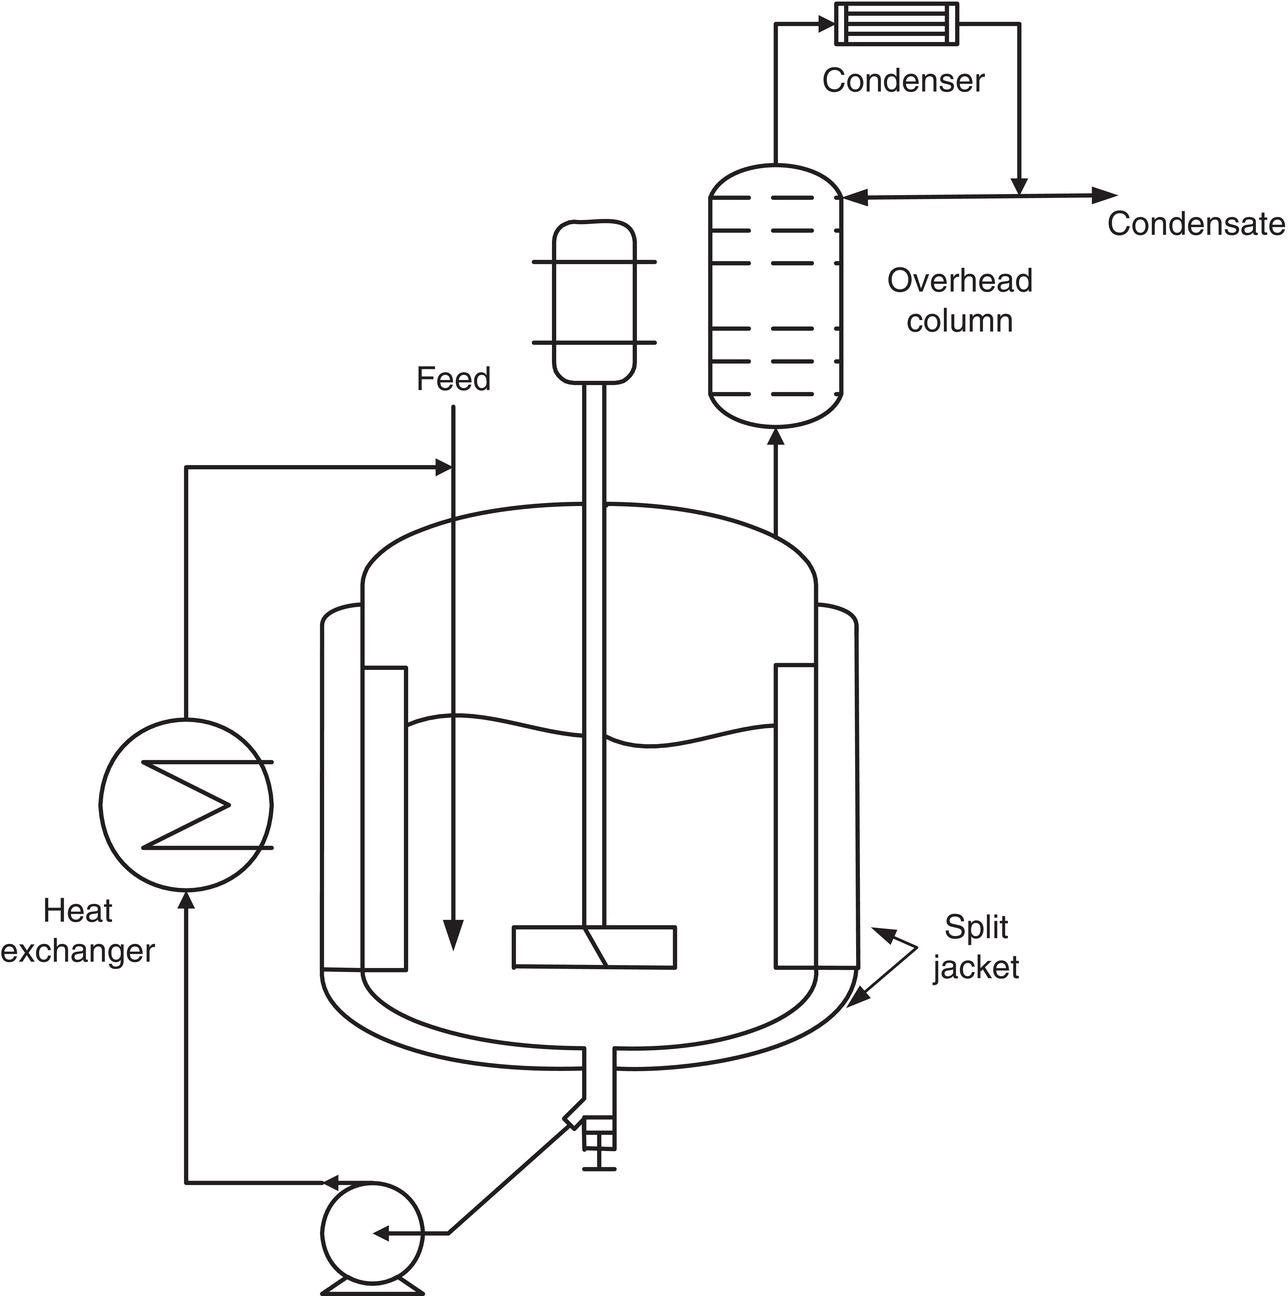 Schematic illustration of a standard jacketed stirred tank for evaporative crystallization with baffles, an overhead condenser, and an external heat exchanger to improve heat transfer.